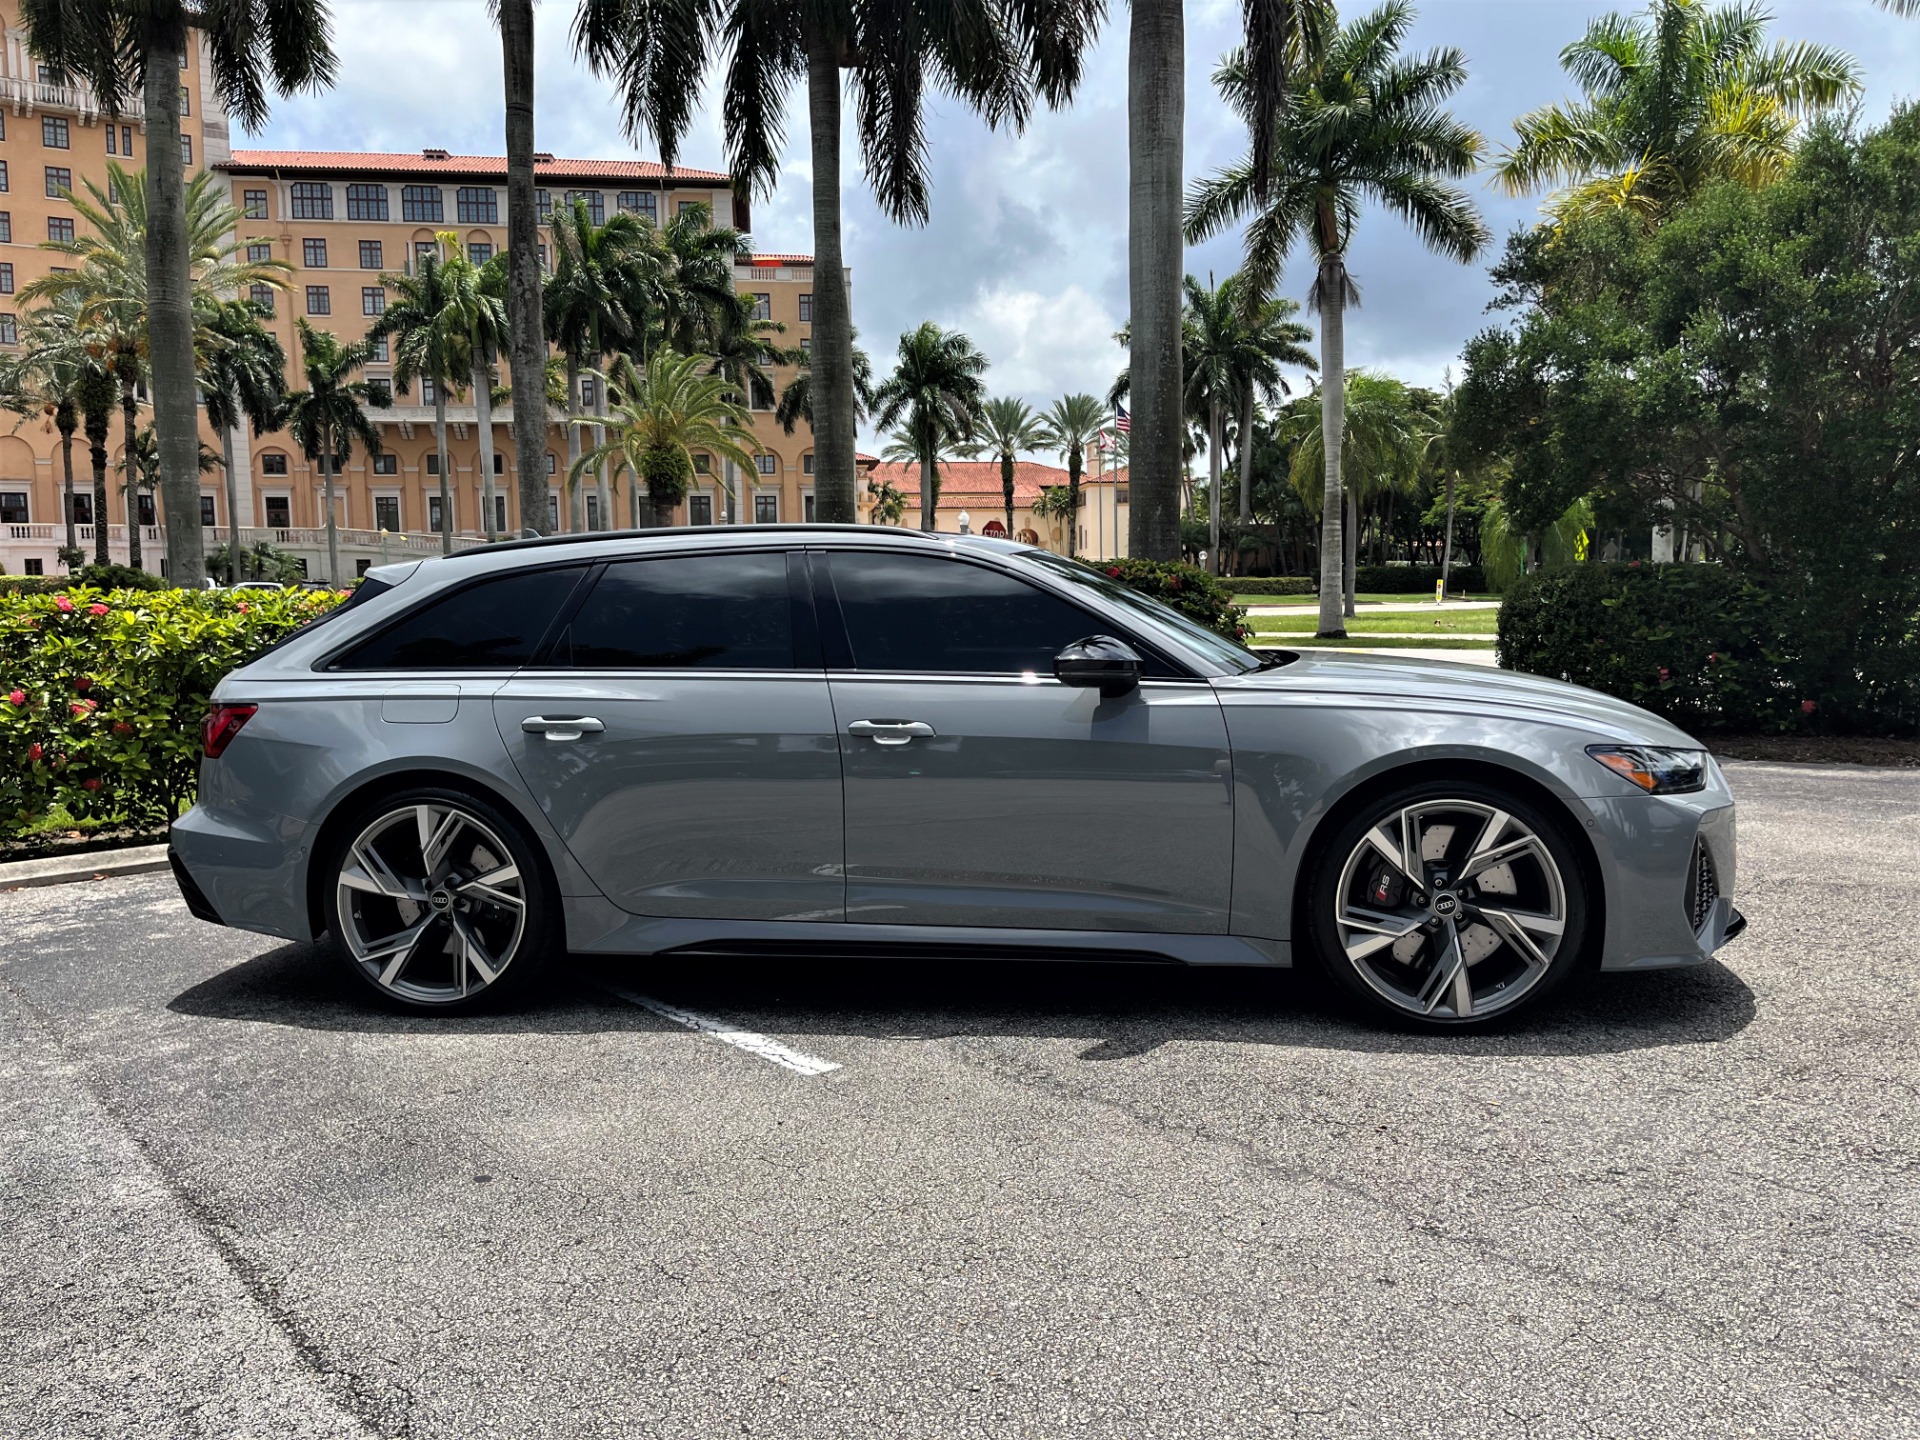 Used 2021 Audi RS 6 Avant 4.0T quattro Avant for sale $129,850 at The Gables Sports Cars in Miami FL 33146 4